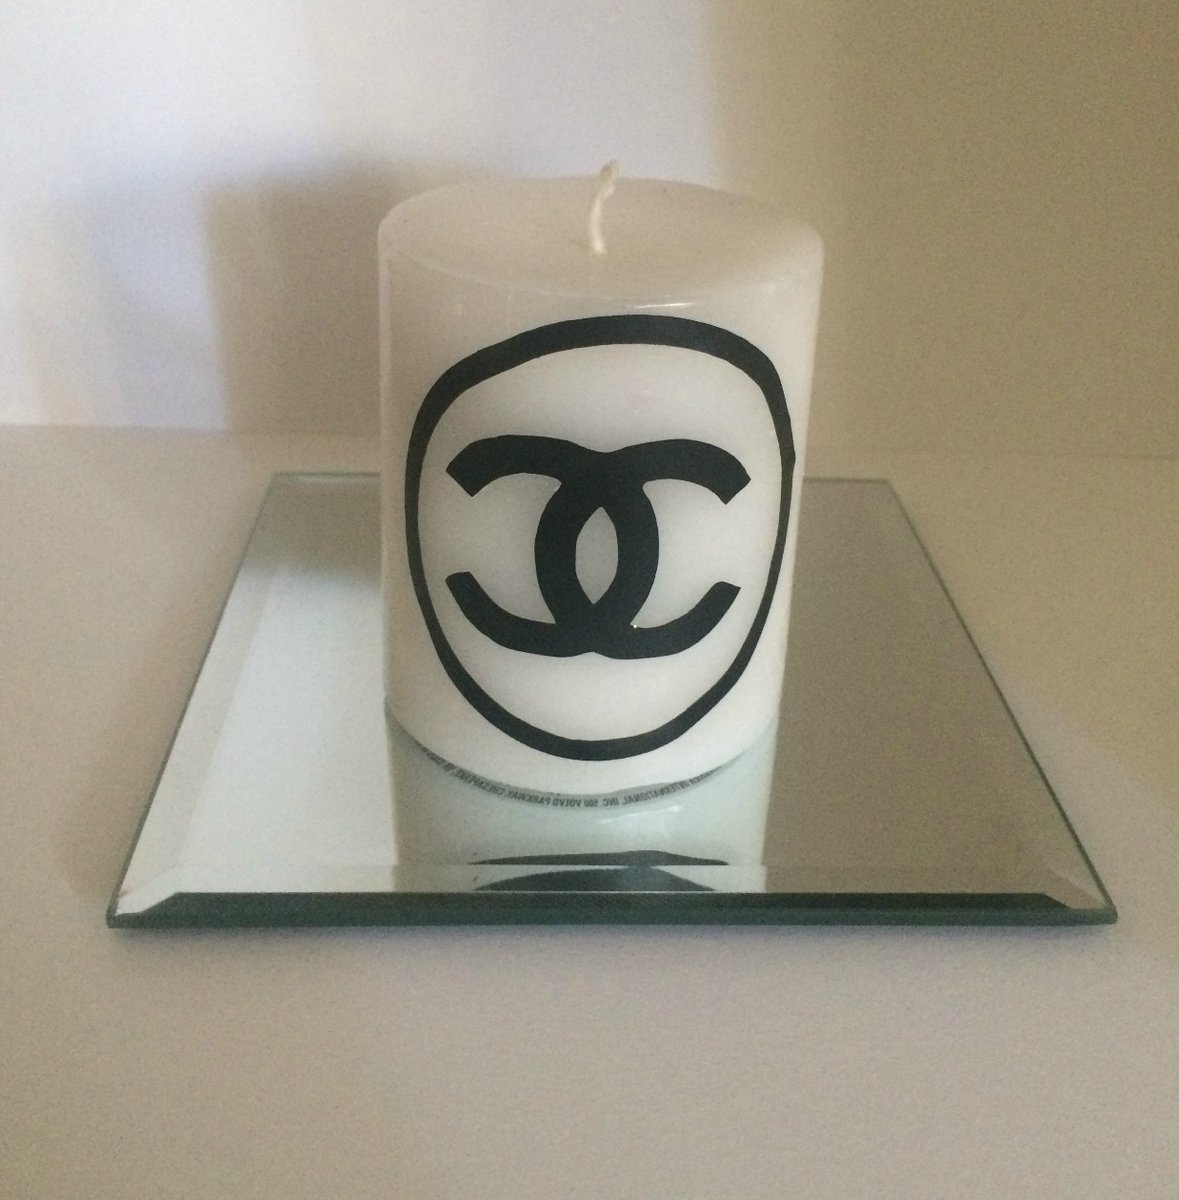 Chanel Luxury Home Decor Accents